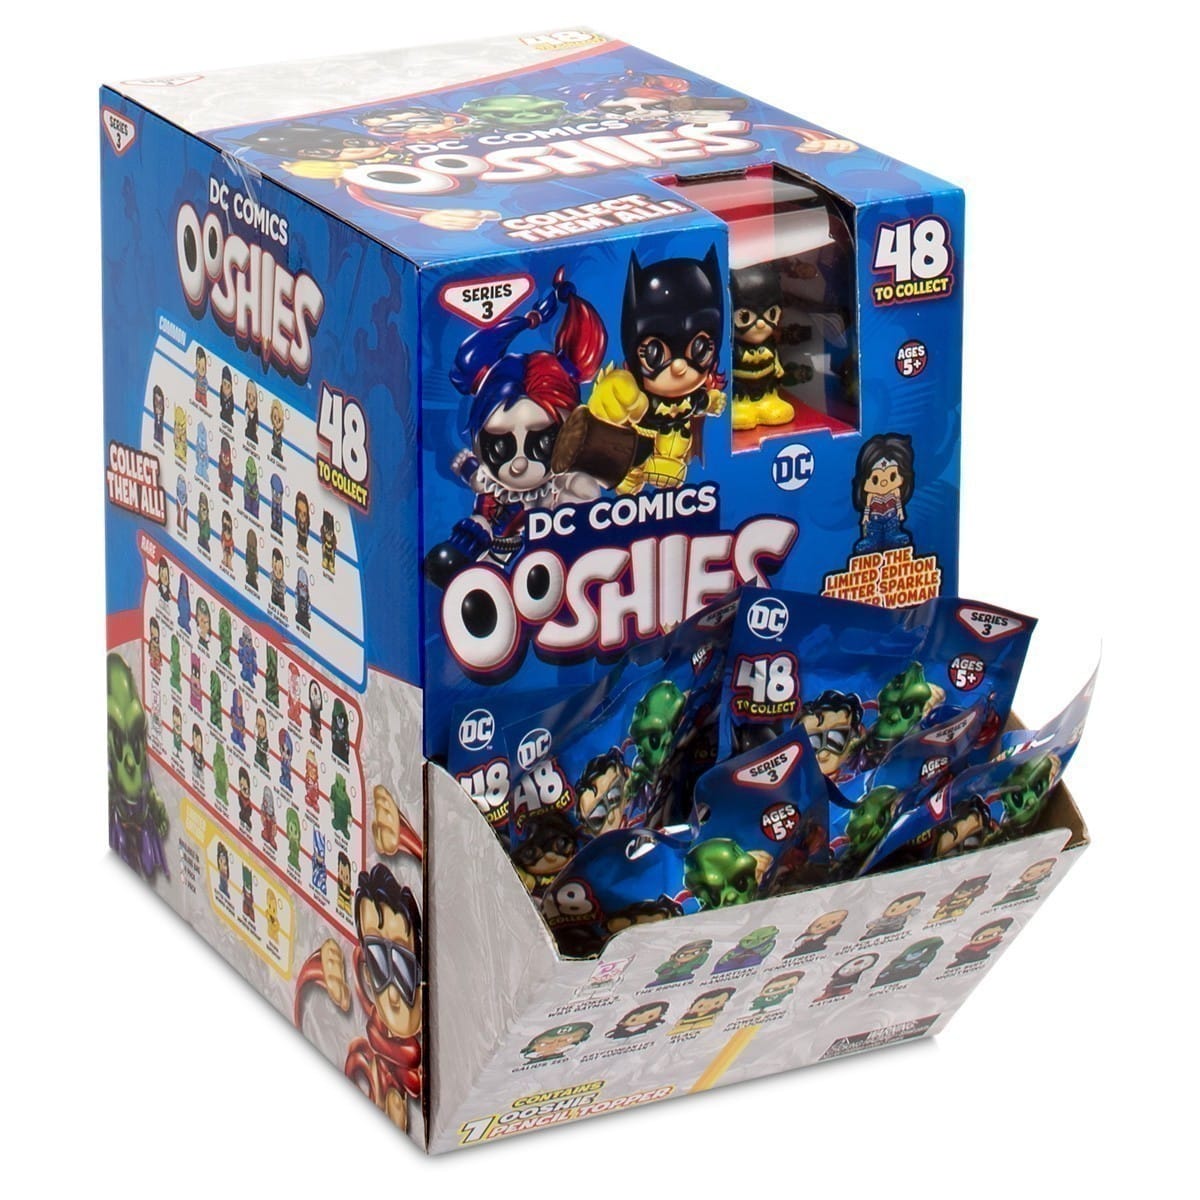 Ooshies Pencil Toppers - Series 3 - DC Comics Blind Bag